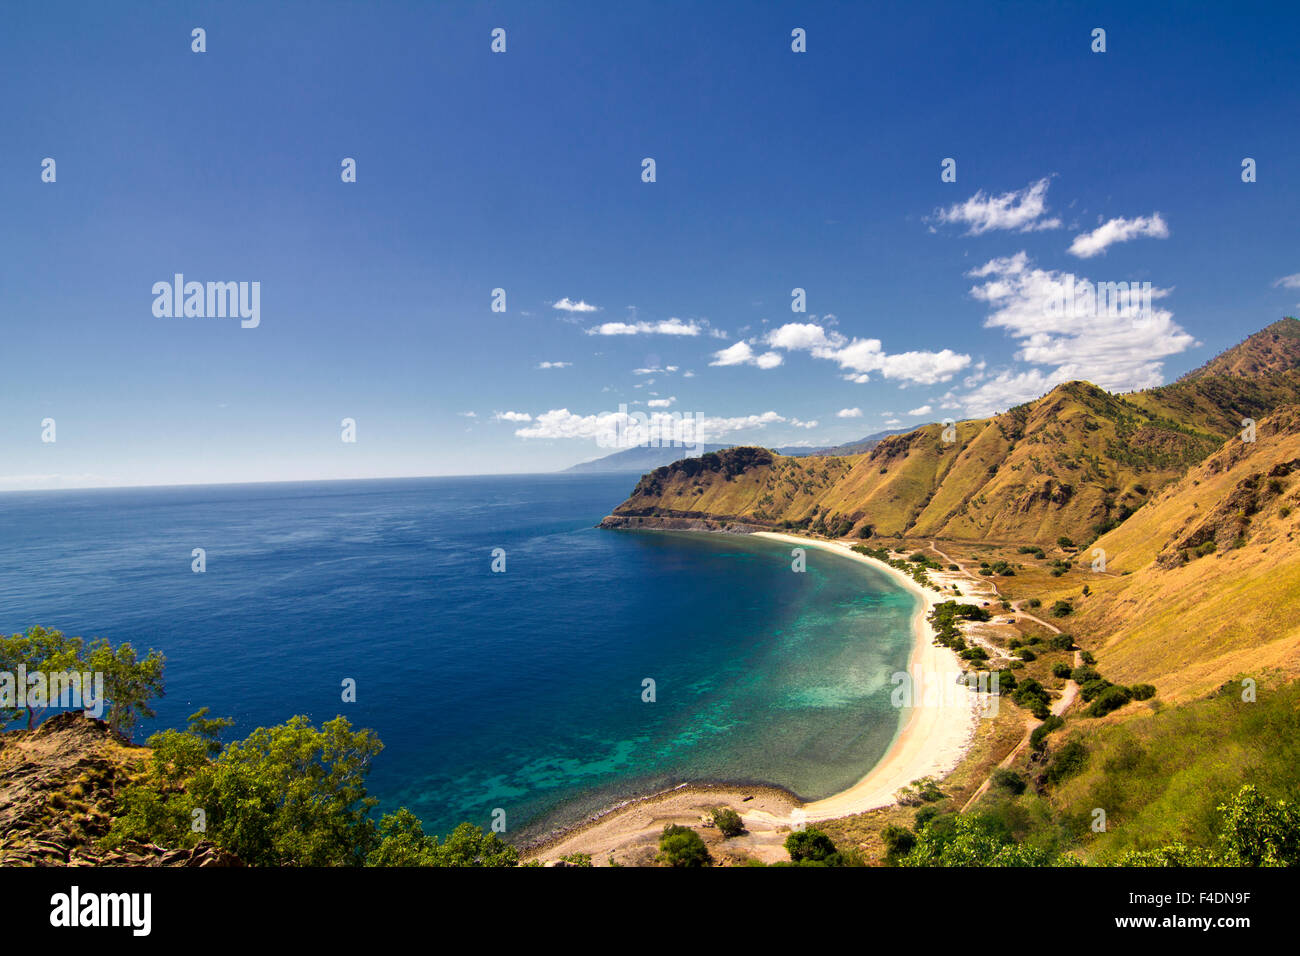 Tropical beach in East Timor as viewed from Cristo Rei Statue in Dili, East Timor Stock Photo